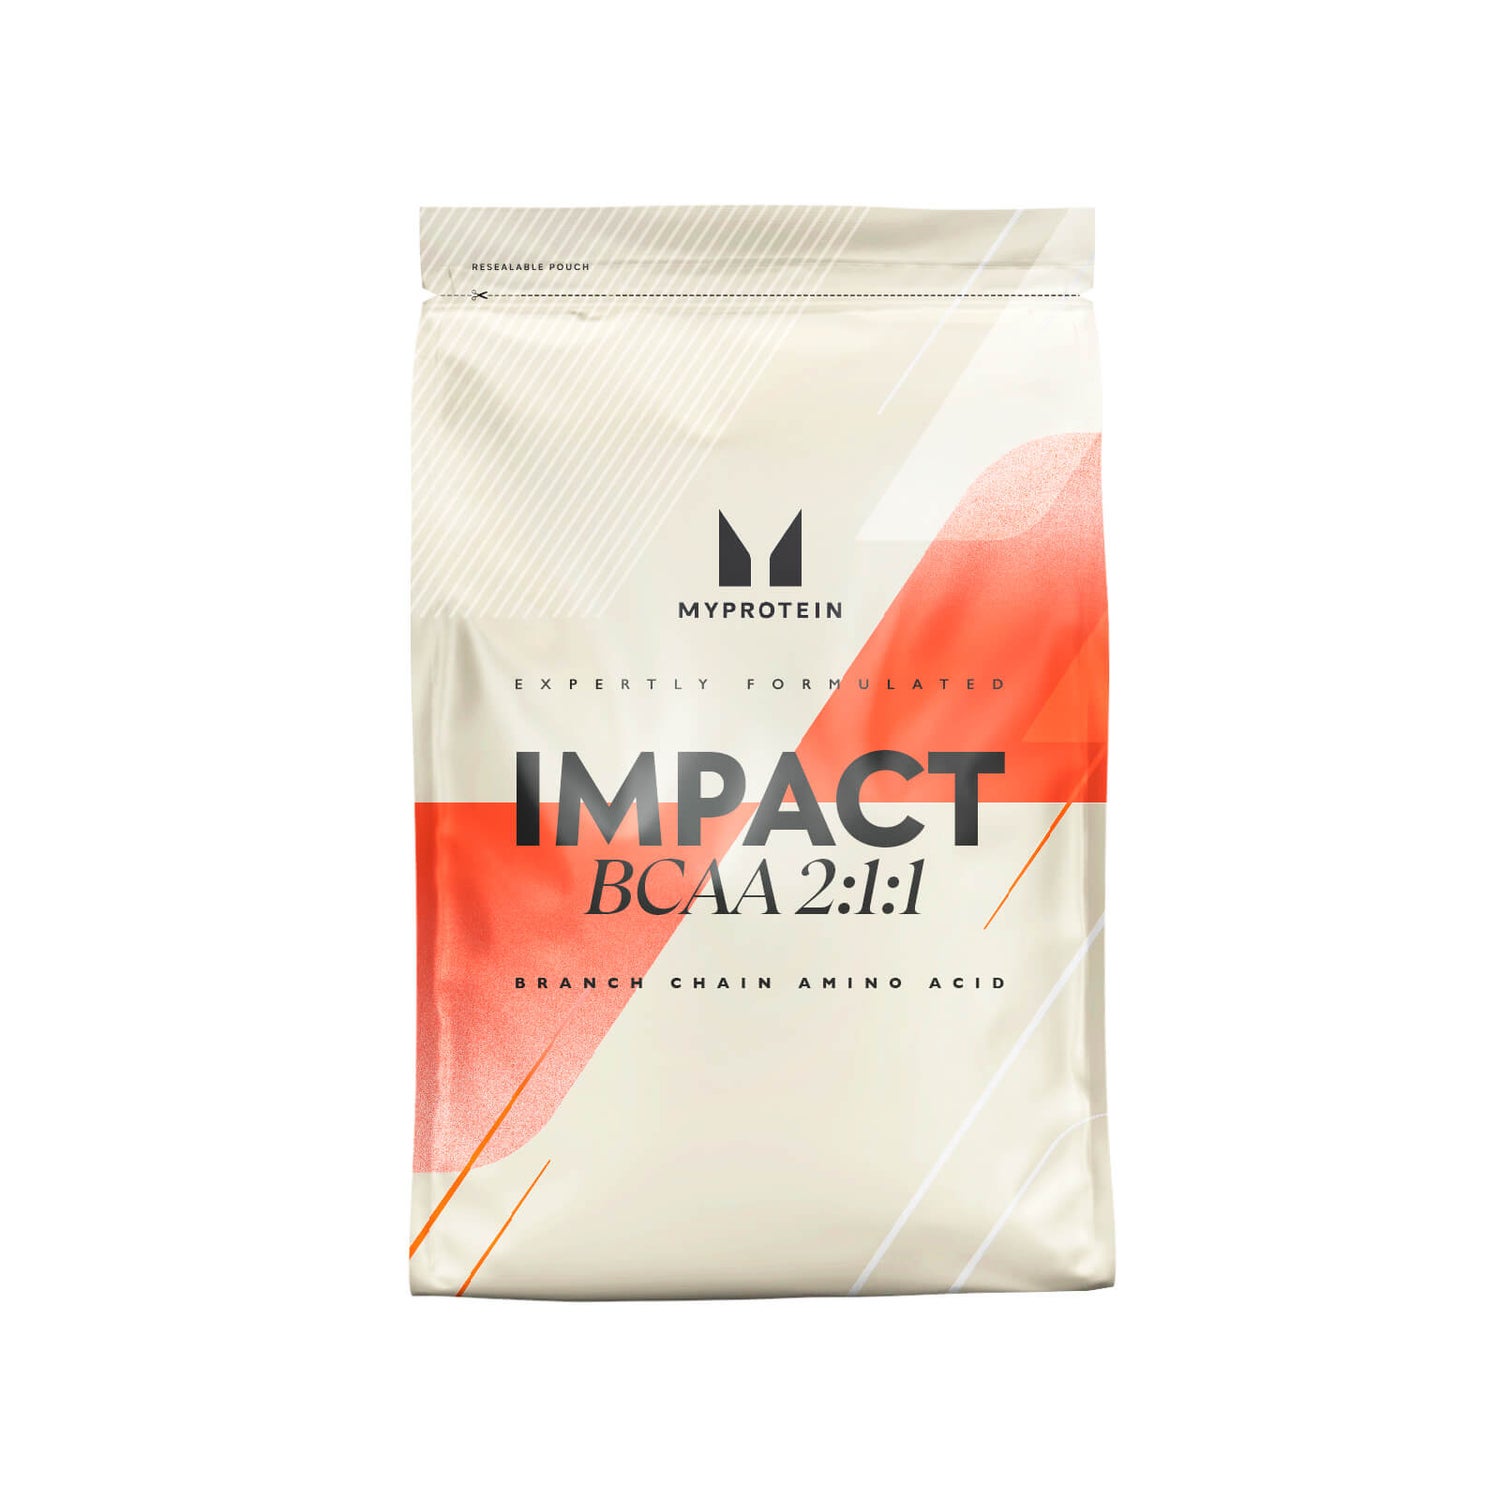 Impact BCAA 2:1:1 - 500g - Unflavoured